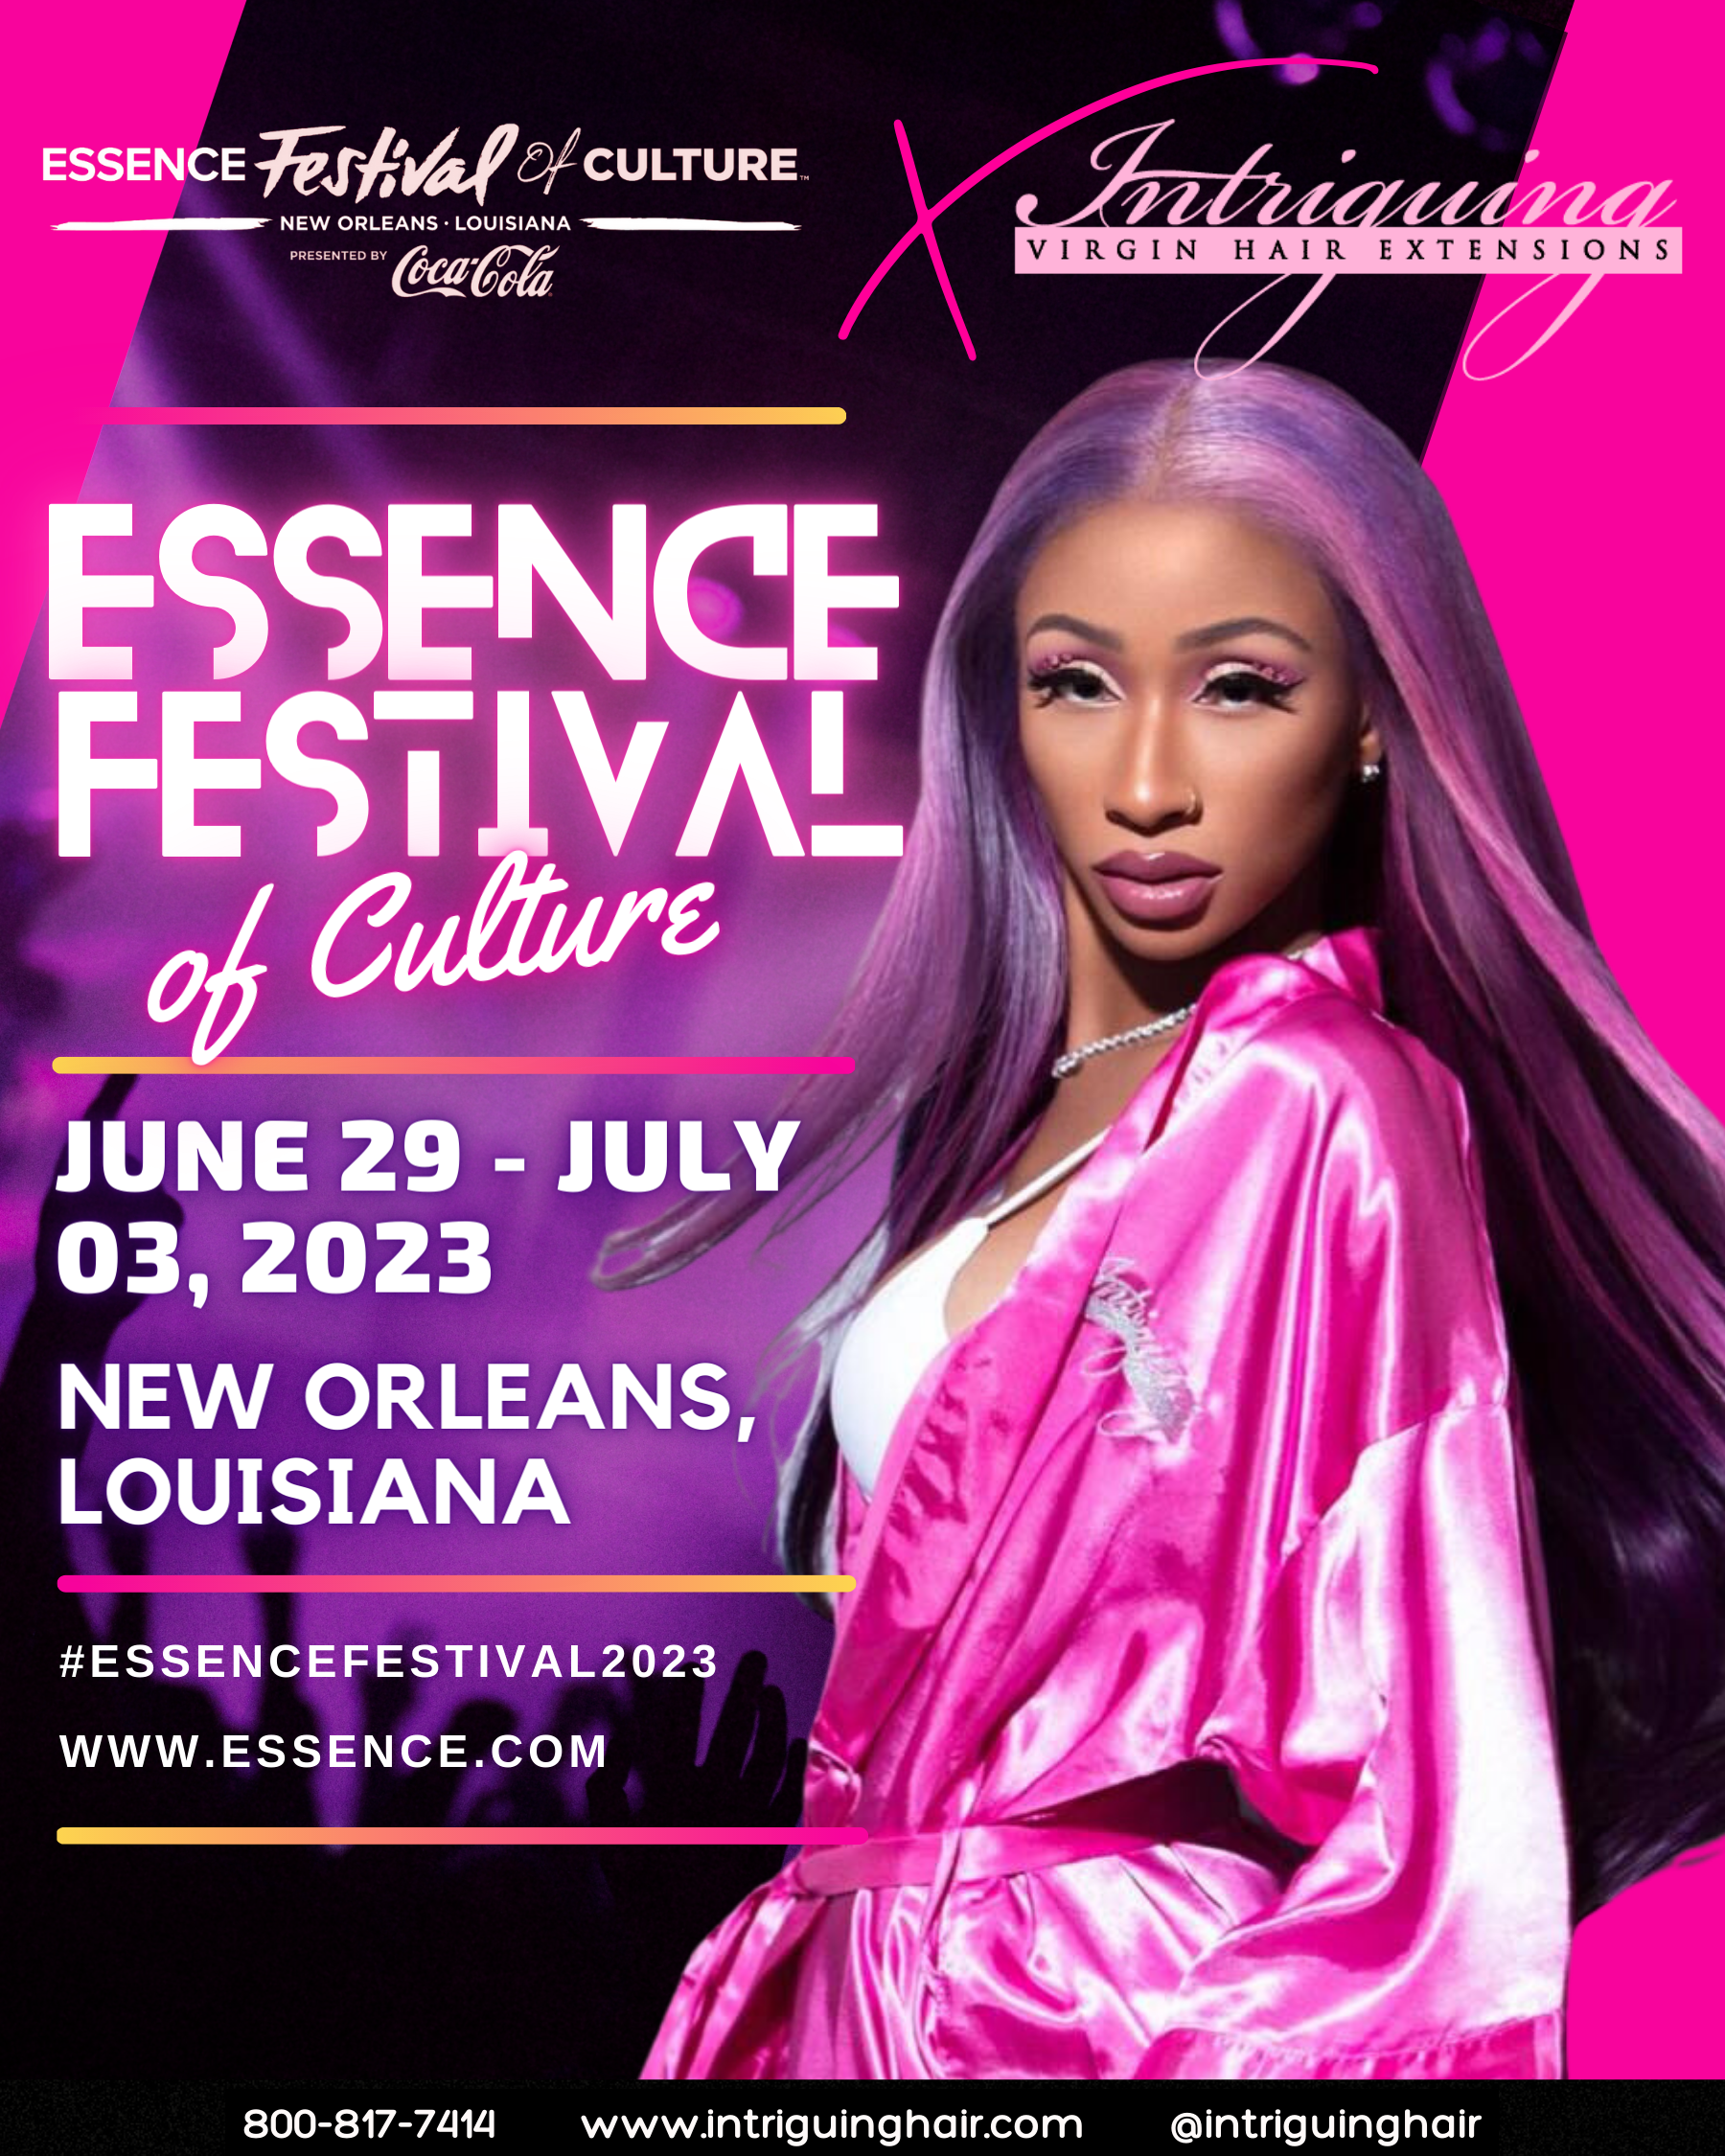 The Essence Festival of Culture 2023: What to Expect and How to Prepare